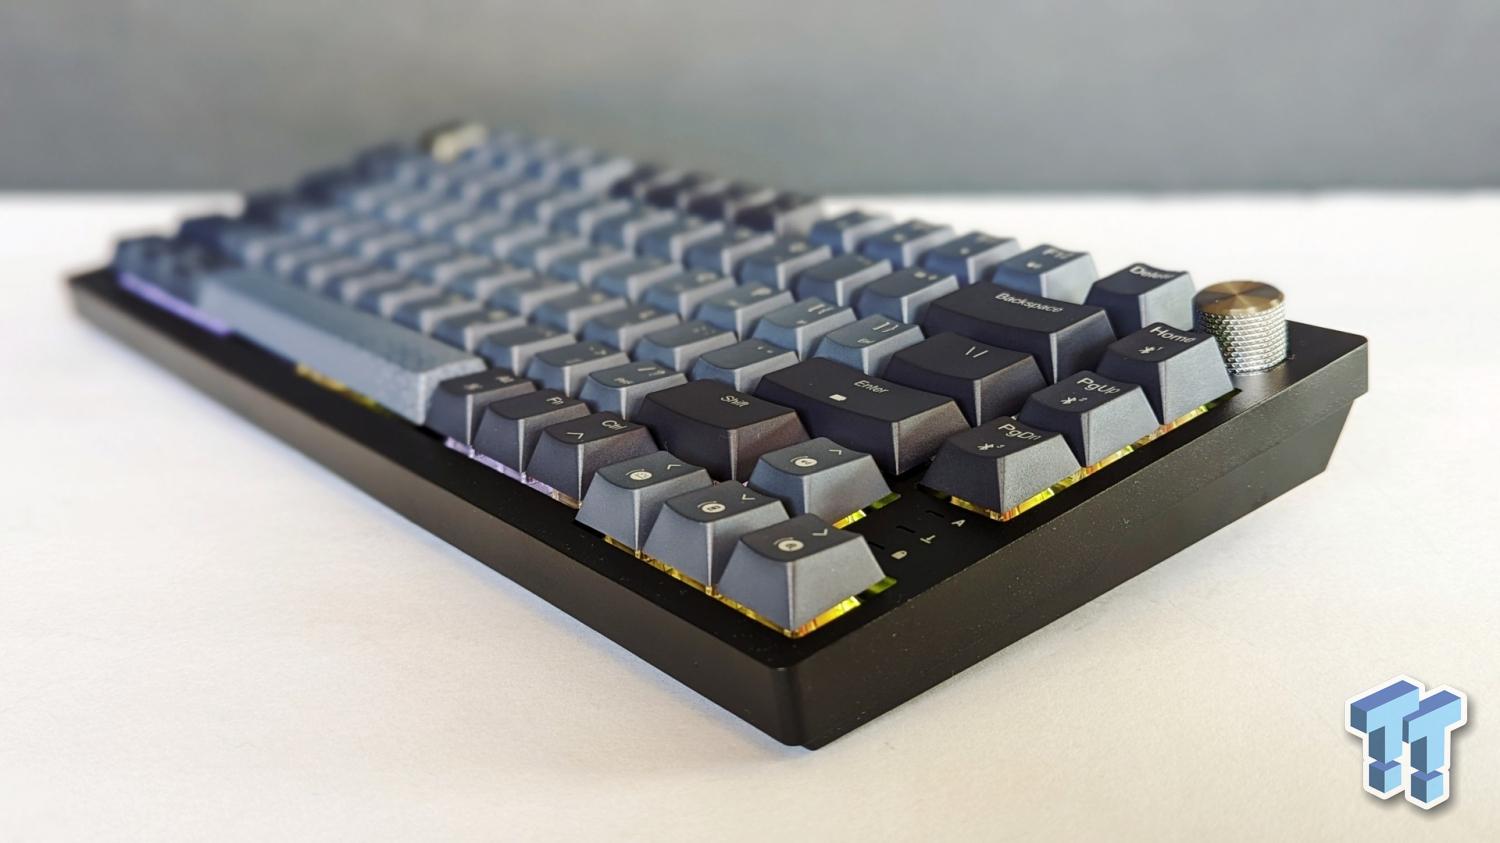 Corsair K65 Plus Wireless review: The new leader for 75% gaming